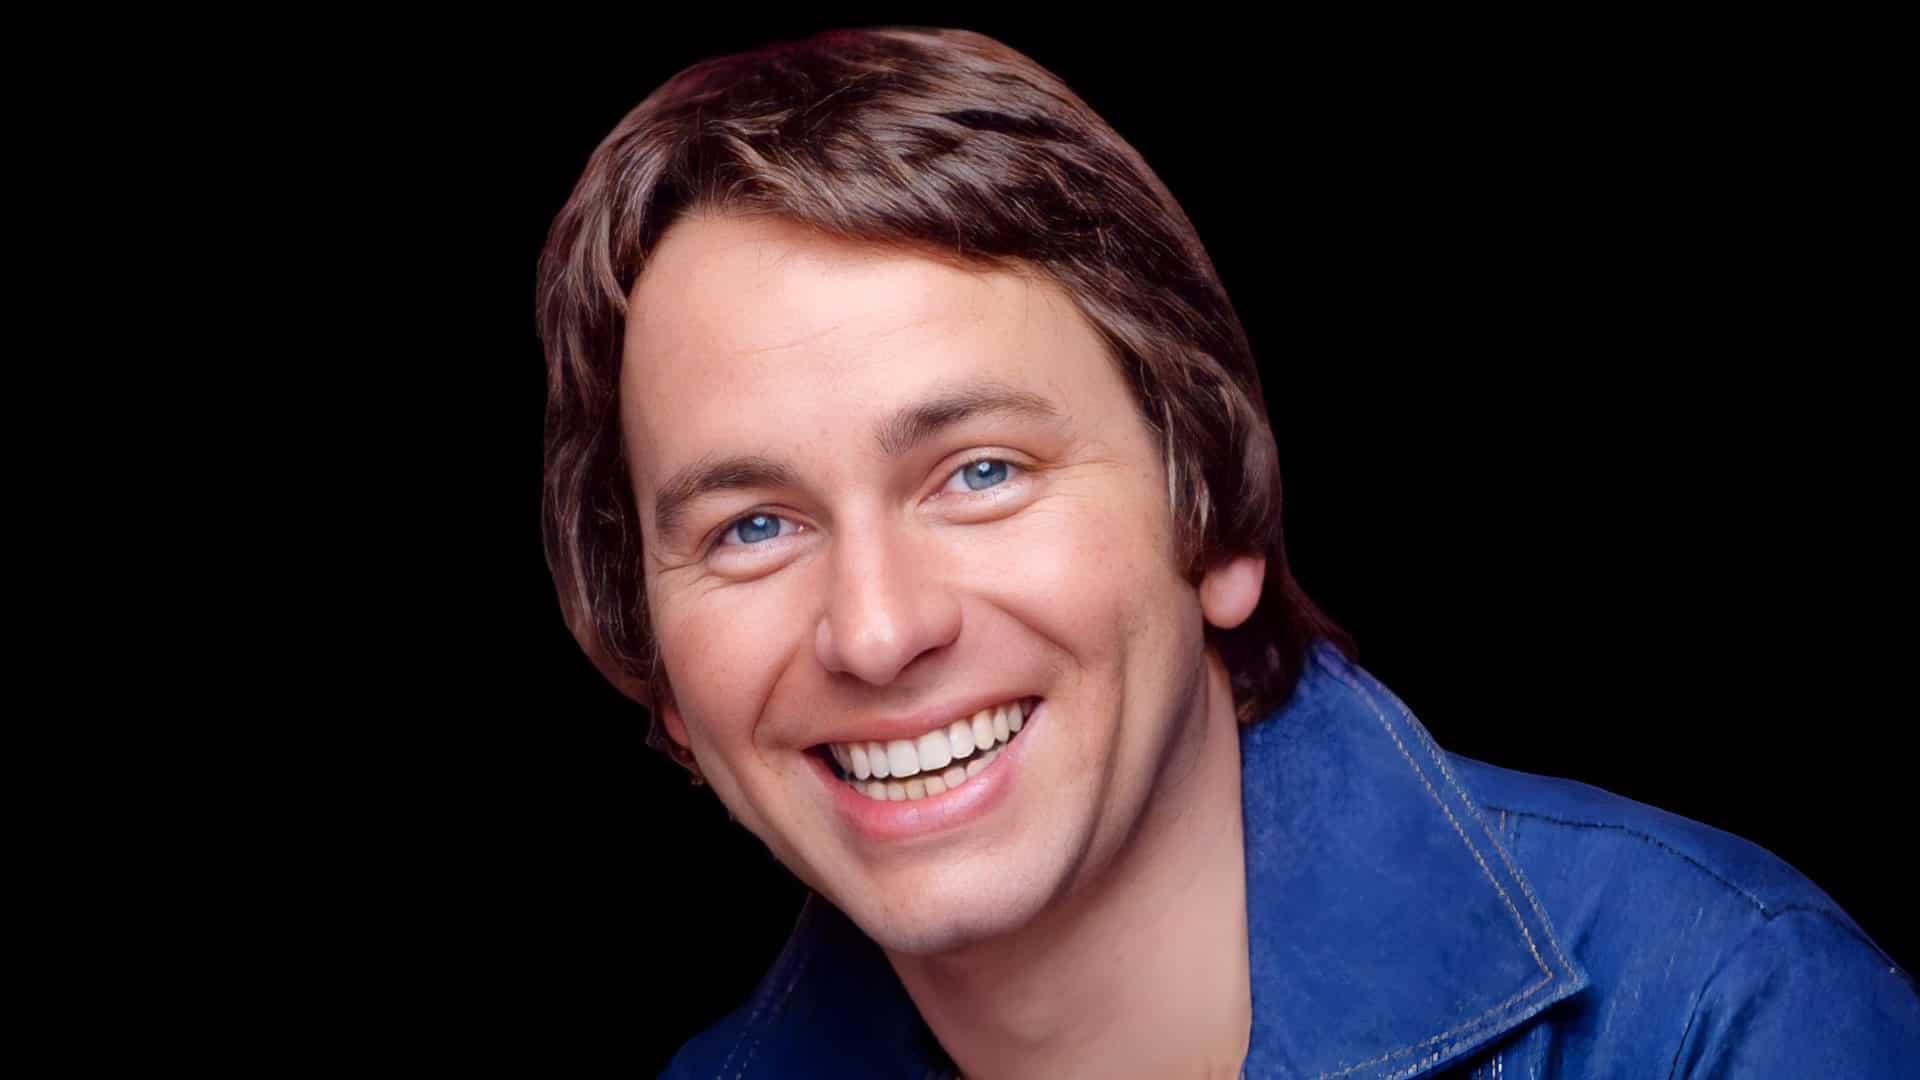 John Ritter Net Worth The Beloved Actor's Threes Company Wealth